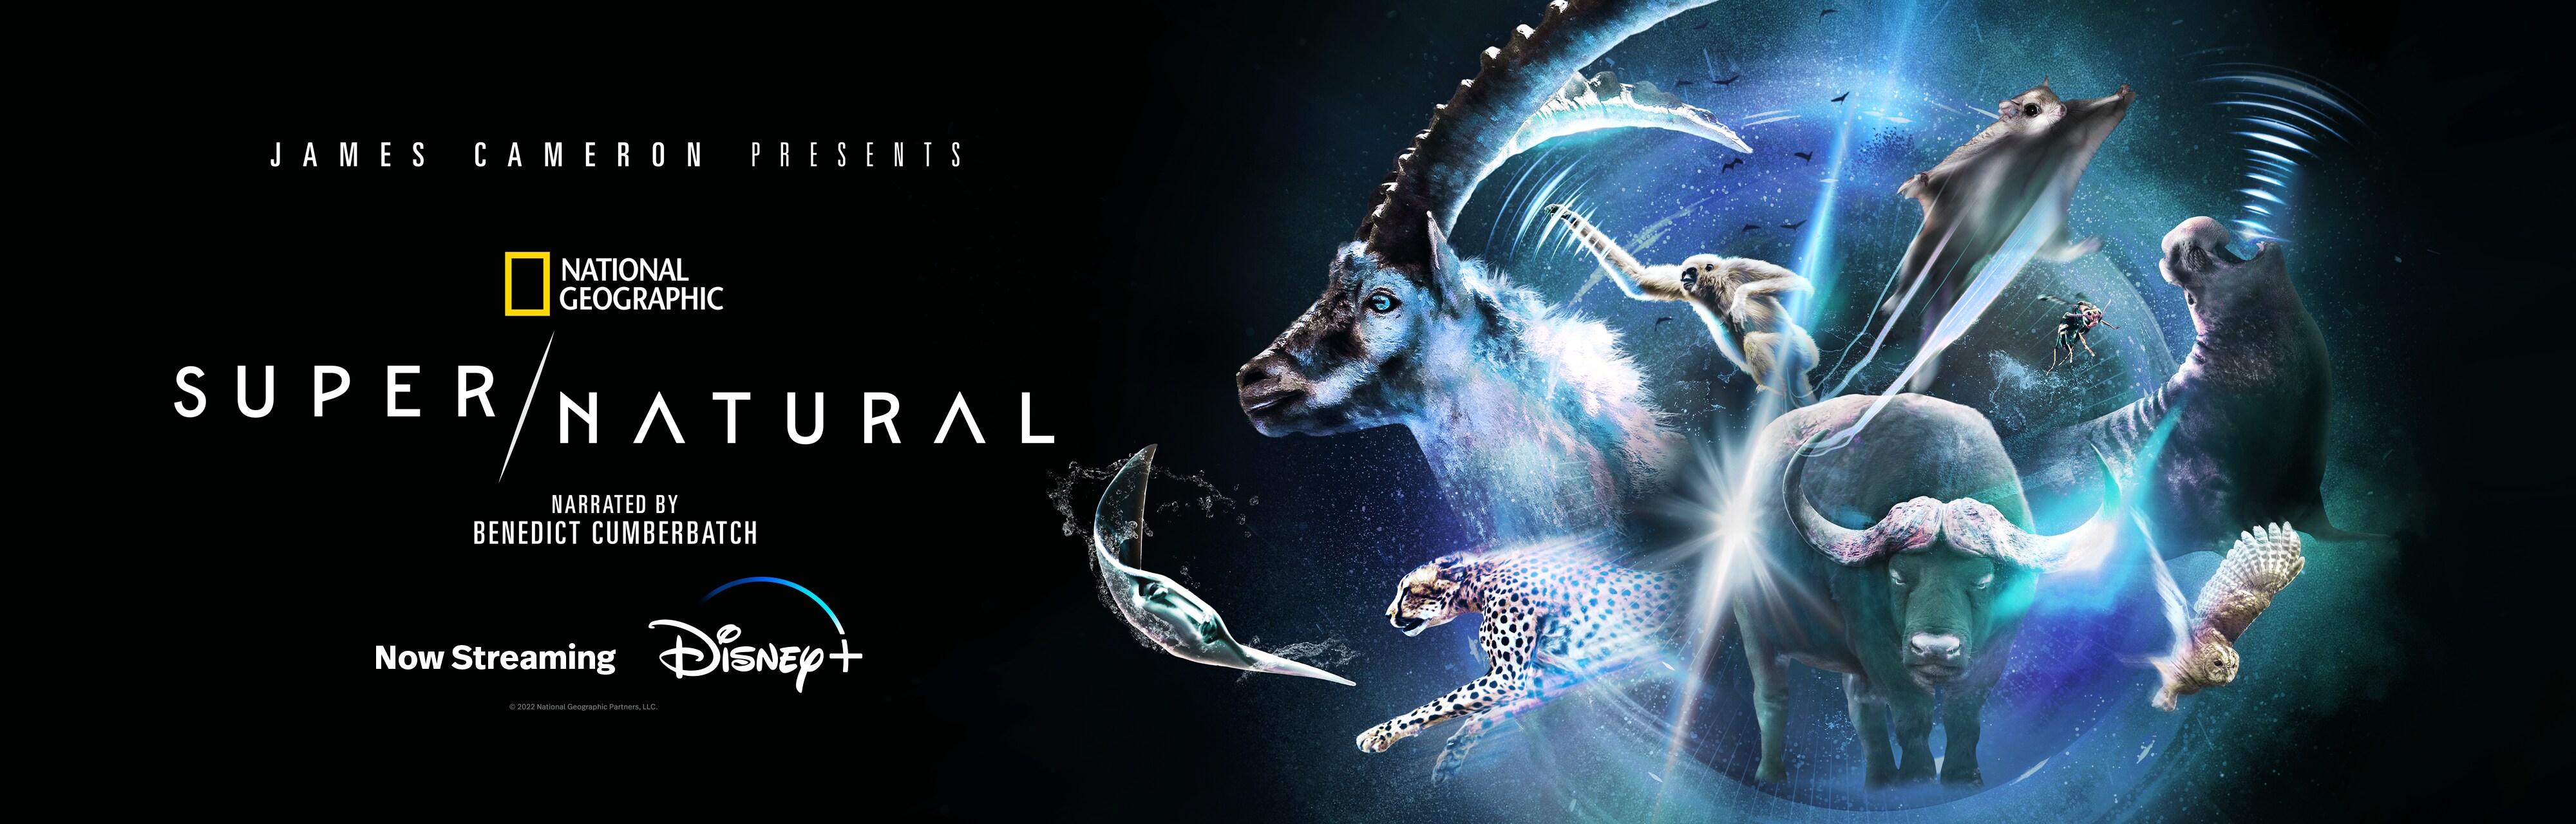 Animals emerge from a swirl of eery blue light on the poster for Super/Natural